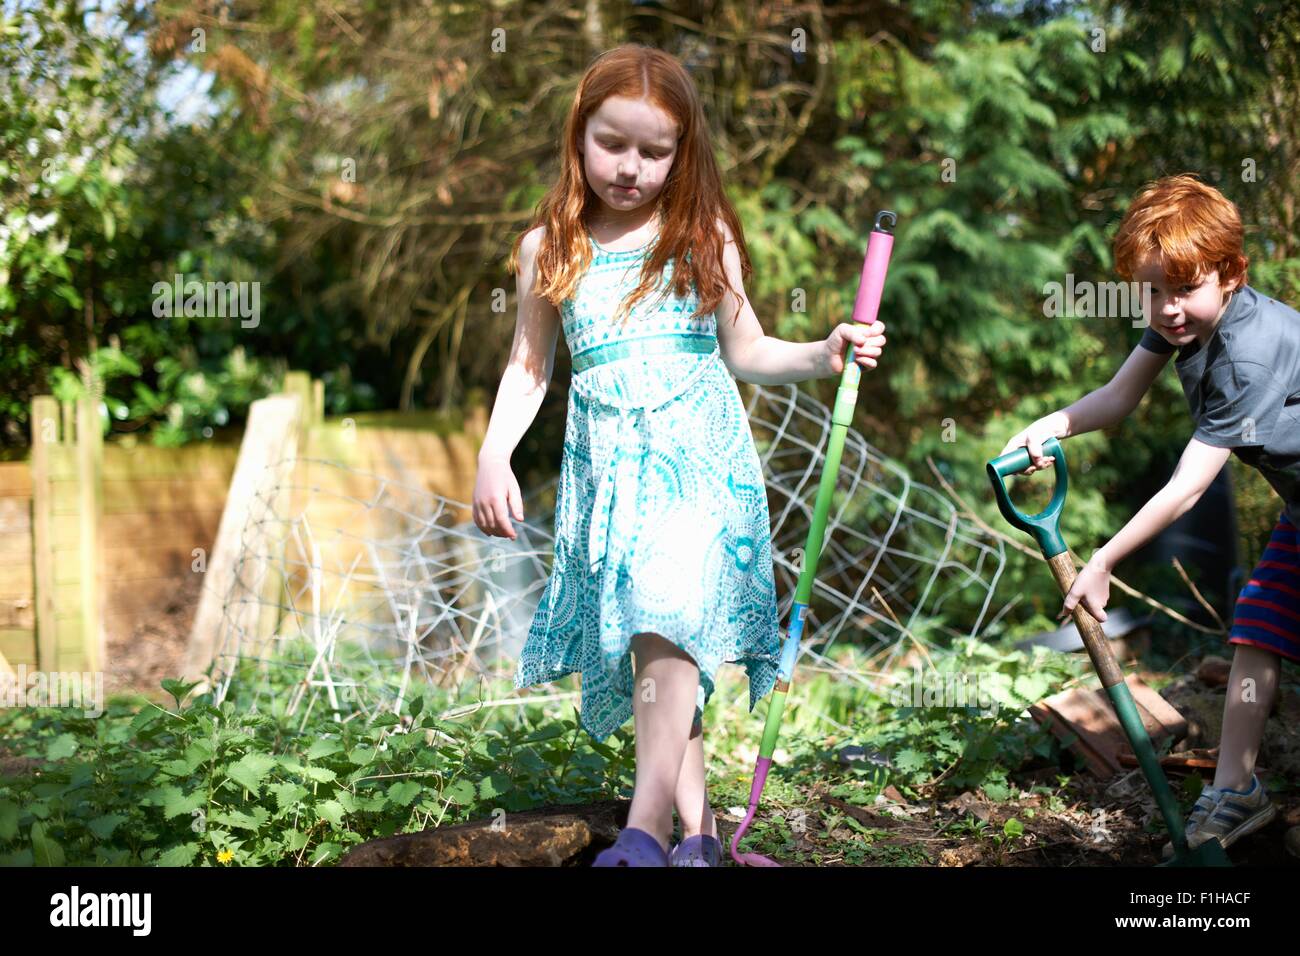 Two young children in garden, holding gardening tools Stock Photo